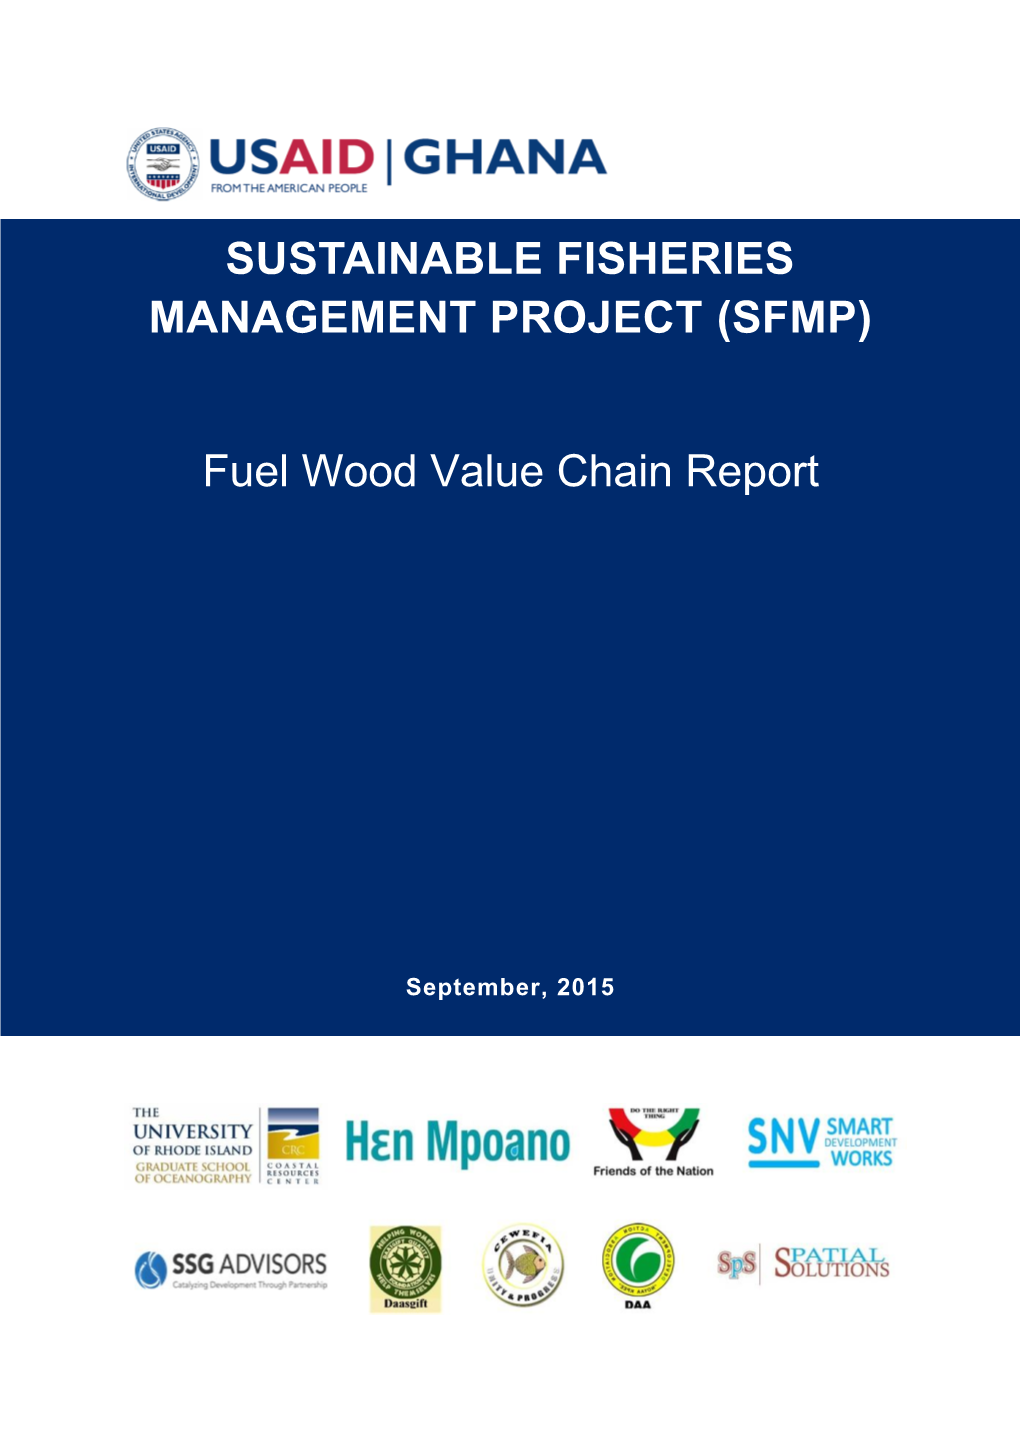 Fuel Wood Value Chain Report